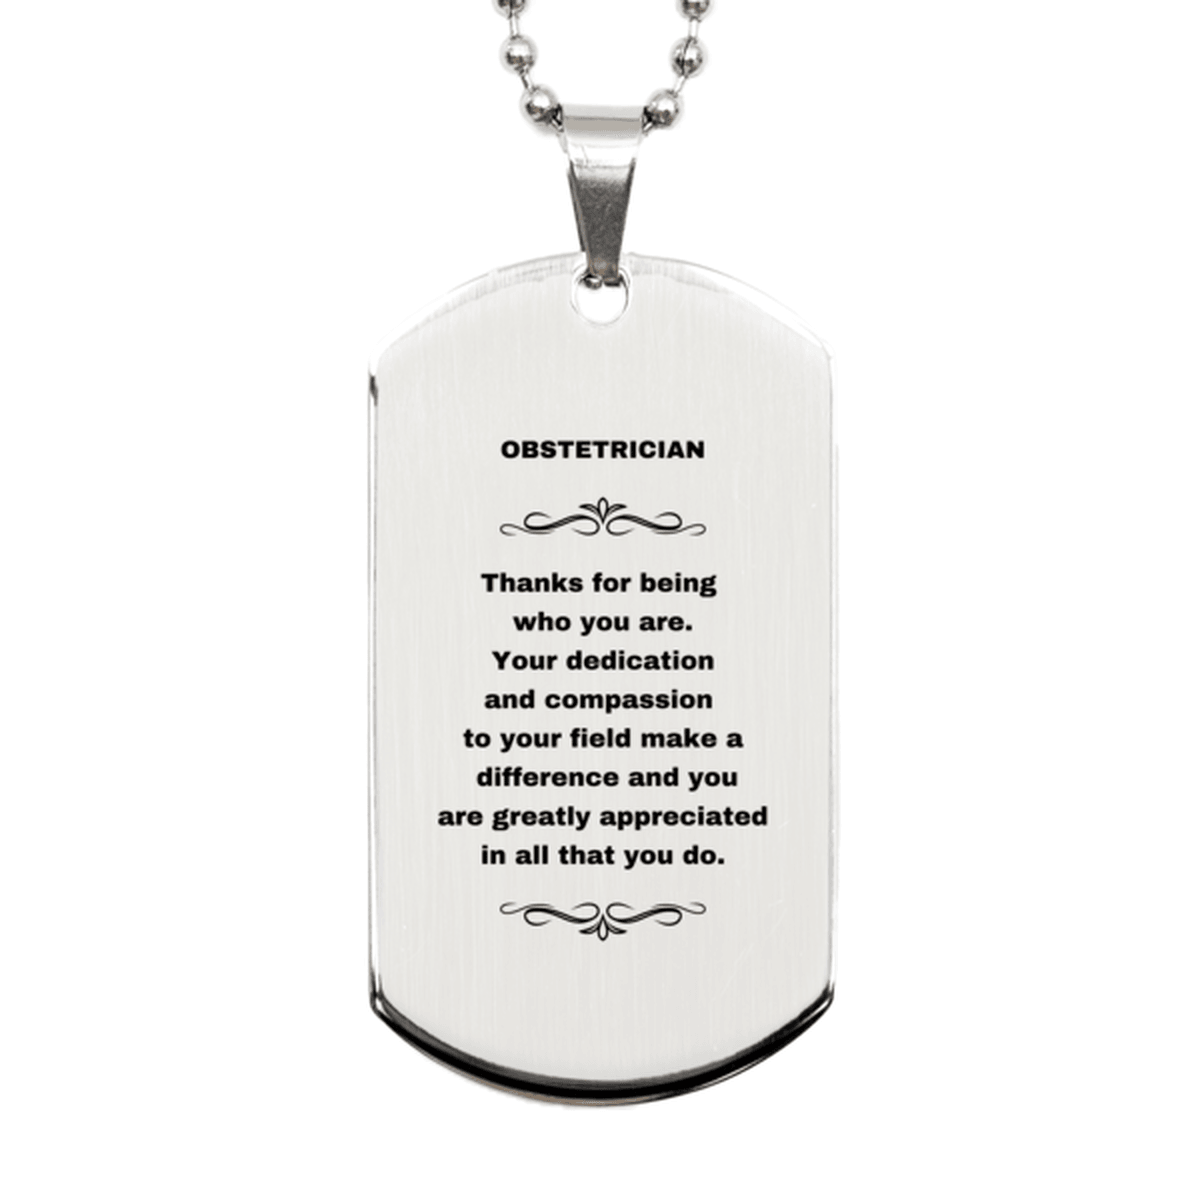 Obstetrician Silver Dog Tag Necklace - Thanks for being who you are - Birthday Christmas Jewelry Gifts Coworkers Colleague Boss - Mallard Moon Gift Shop